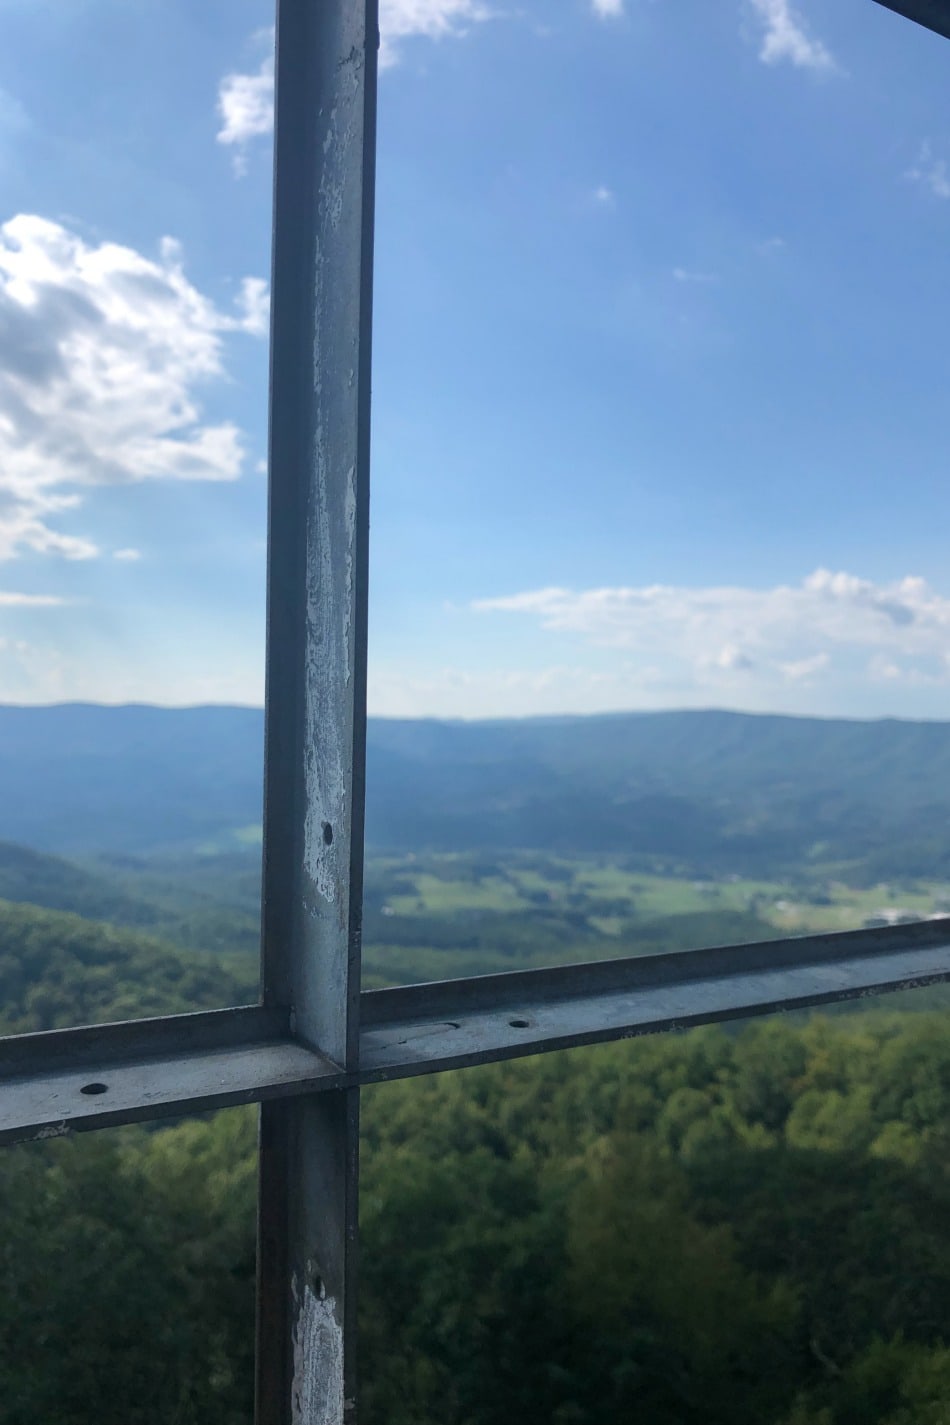 Labor Day Hike to the Fire Tower | Growing Up Herbal | Enjoy views of the Appalachian Mountains of East Tennessee in these photos from our Labor Day hike to the fire tower.